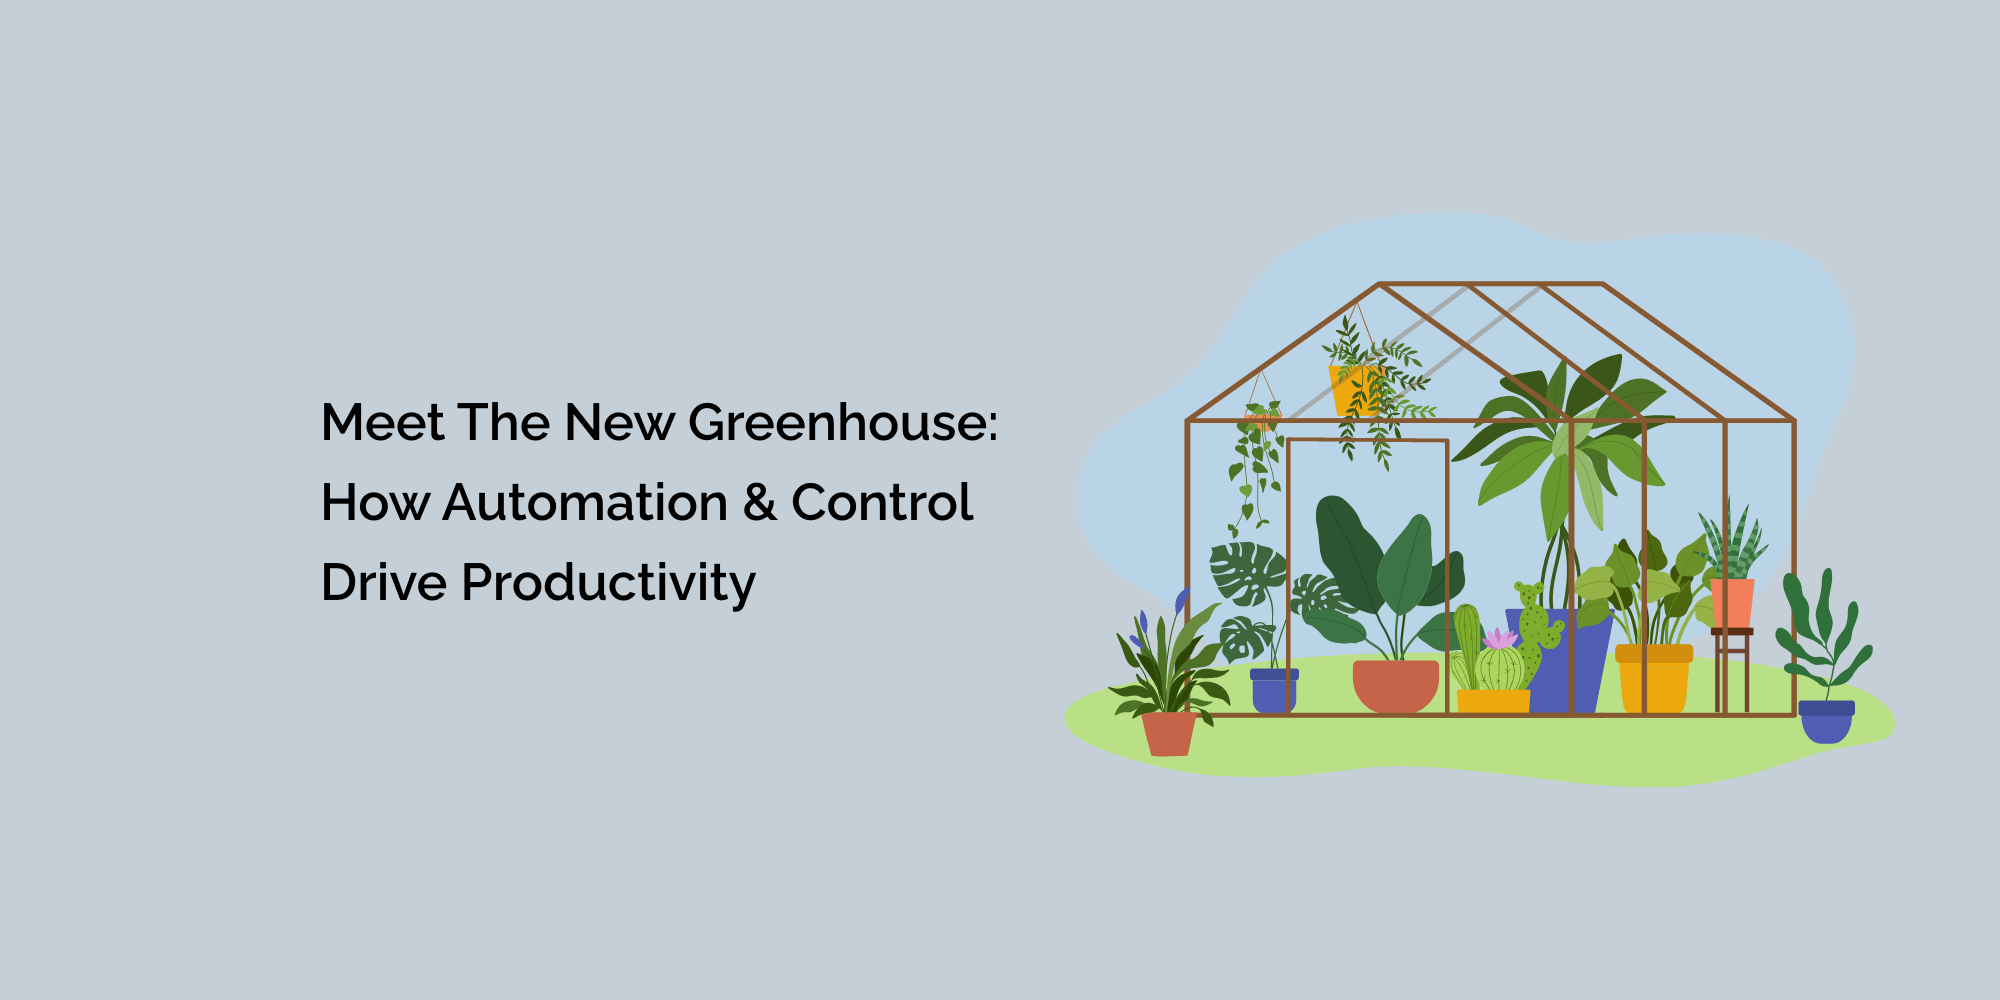 Meet the New Greenhouse: How Automation and Control Drive Productivity